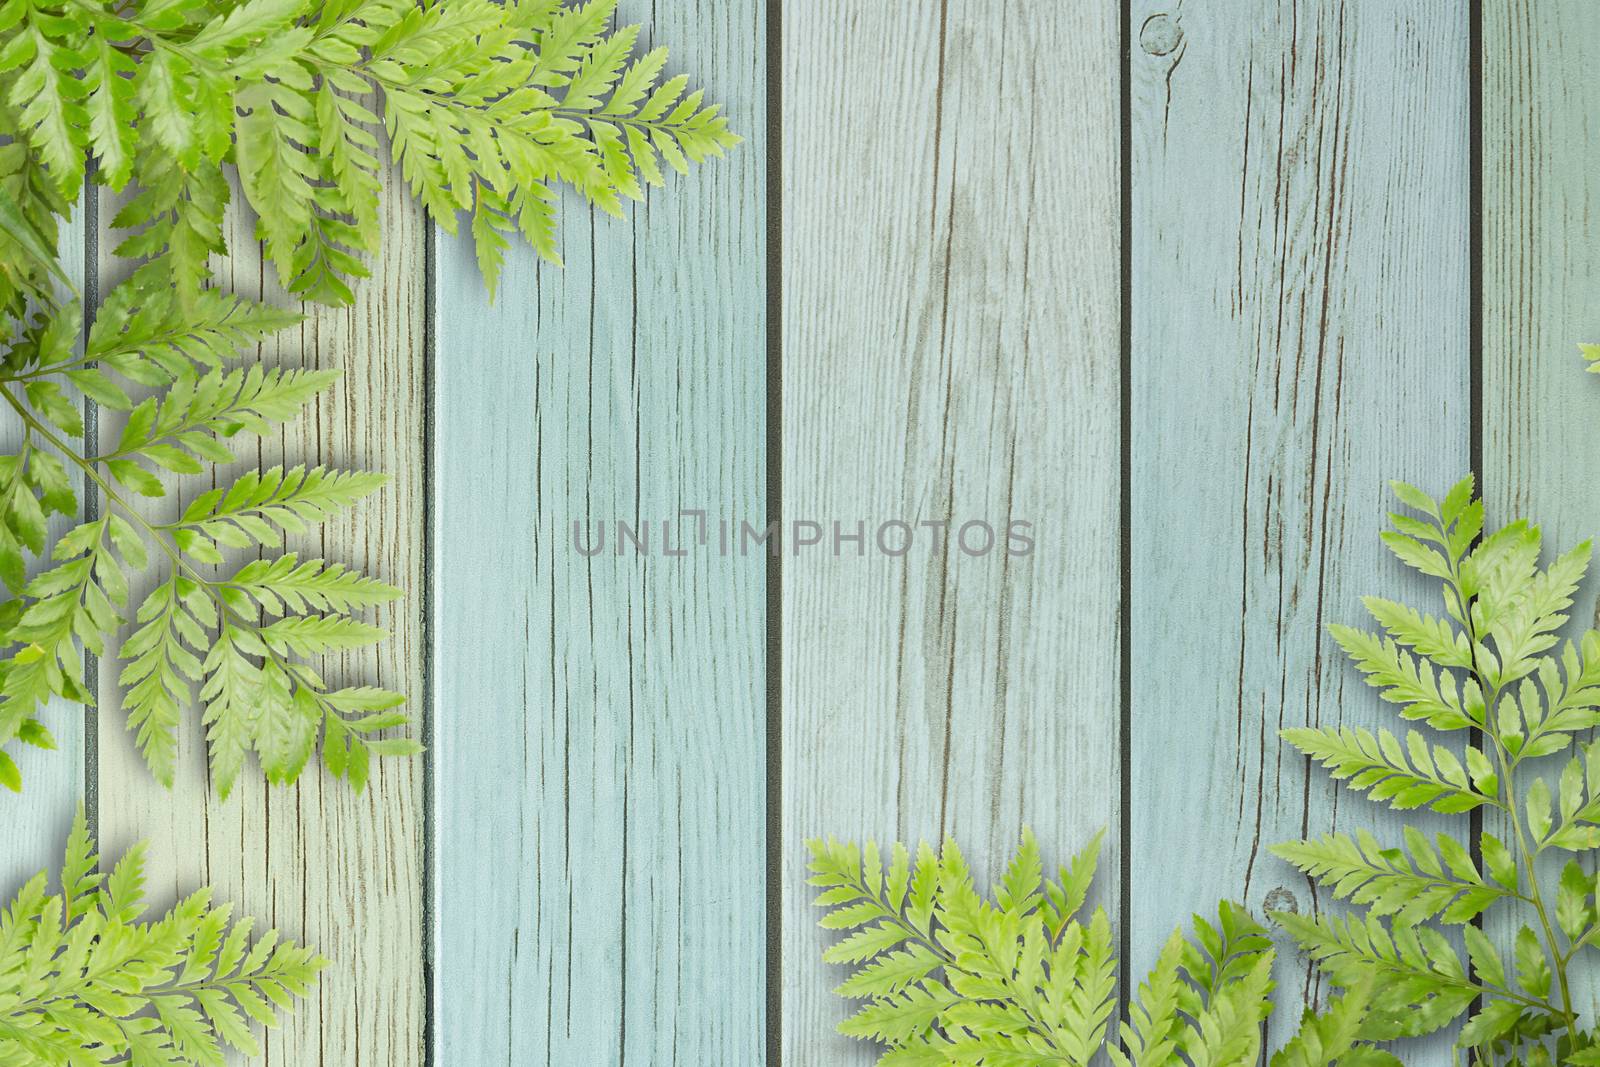 Green Leaves On Wooden With Spaces For Text, Nature Border by rakoptonLPN